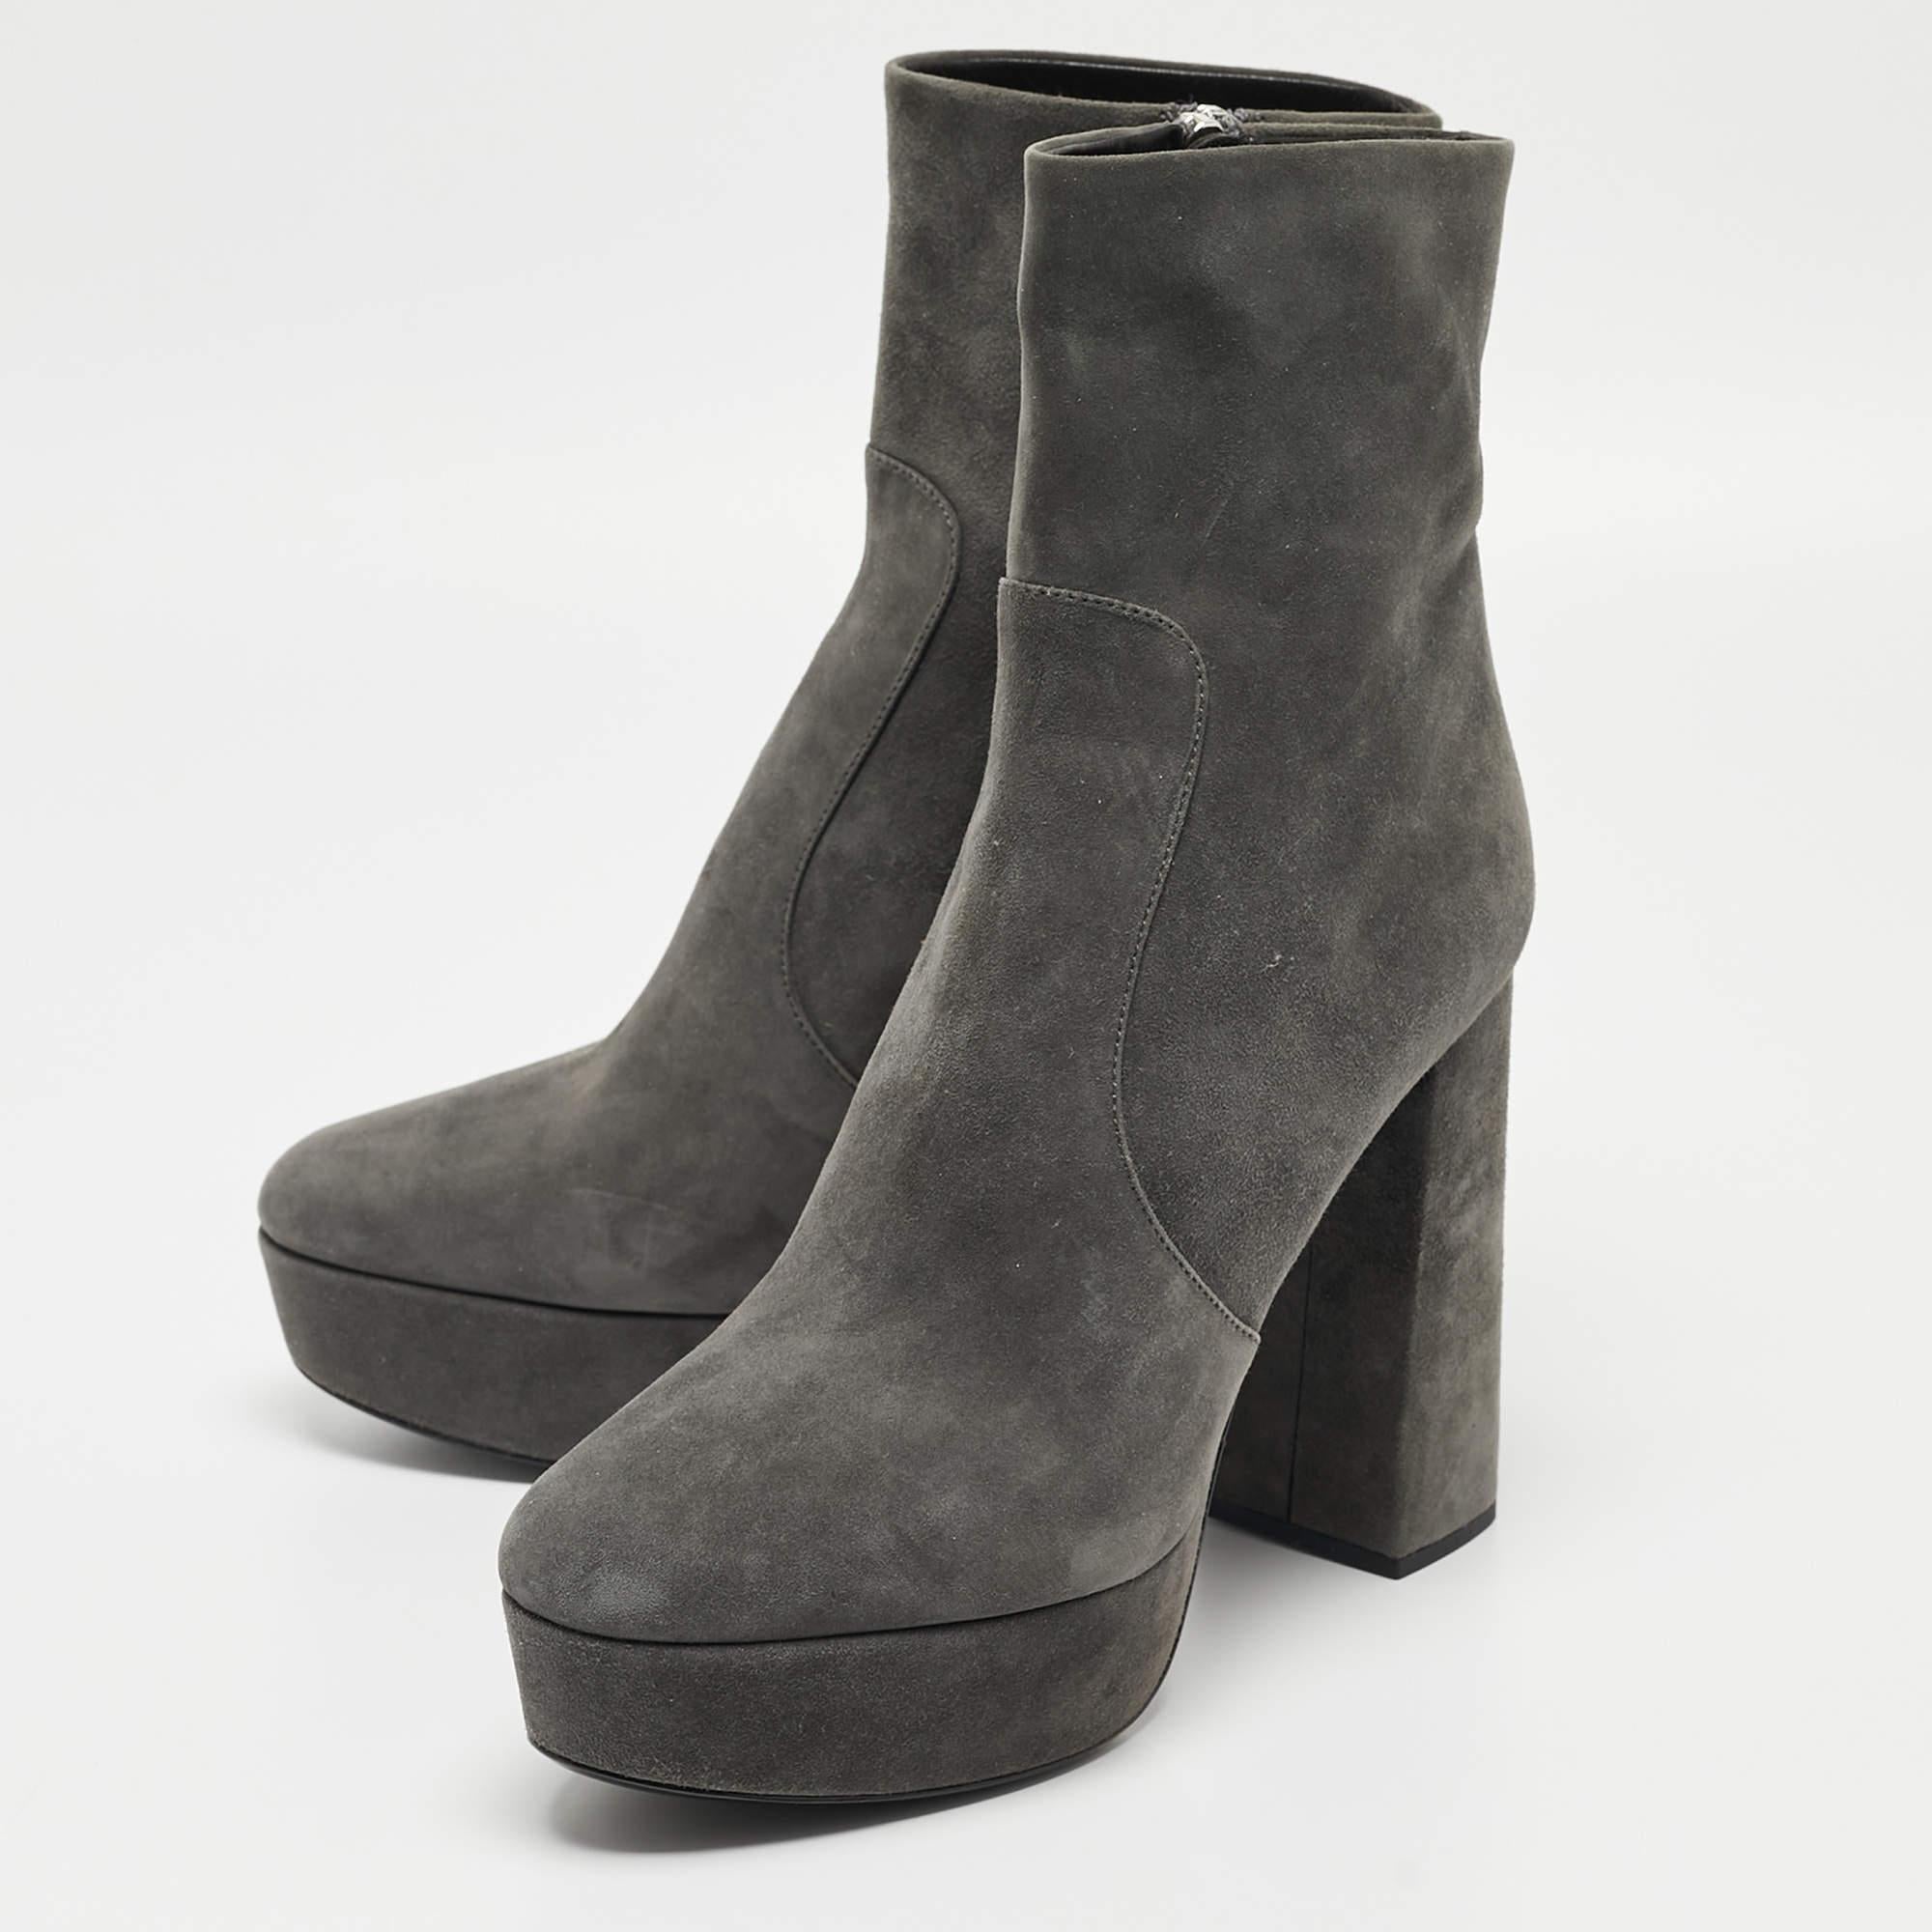 Give your outfit a luxe update with this pair of Prada ankle boots. The shoes are sewn perfectly to help you make a statement in them for a long time.

